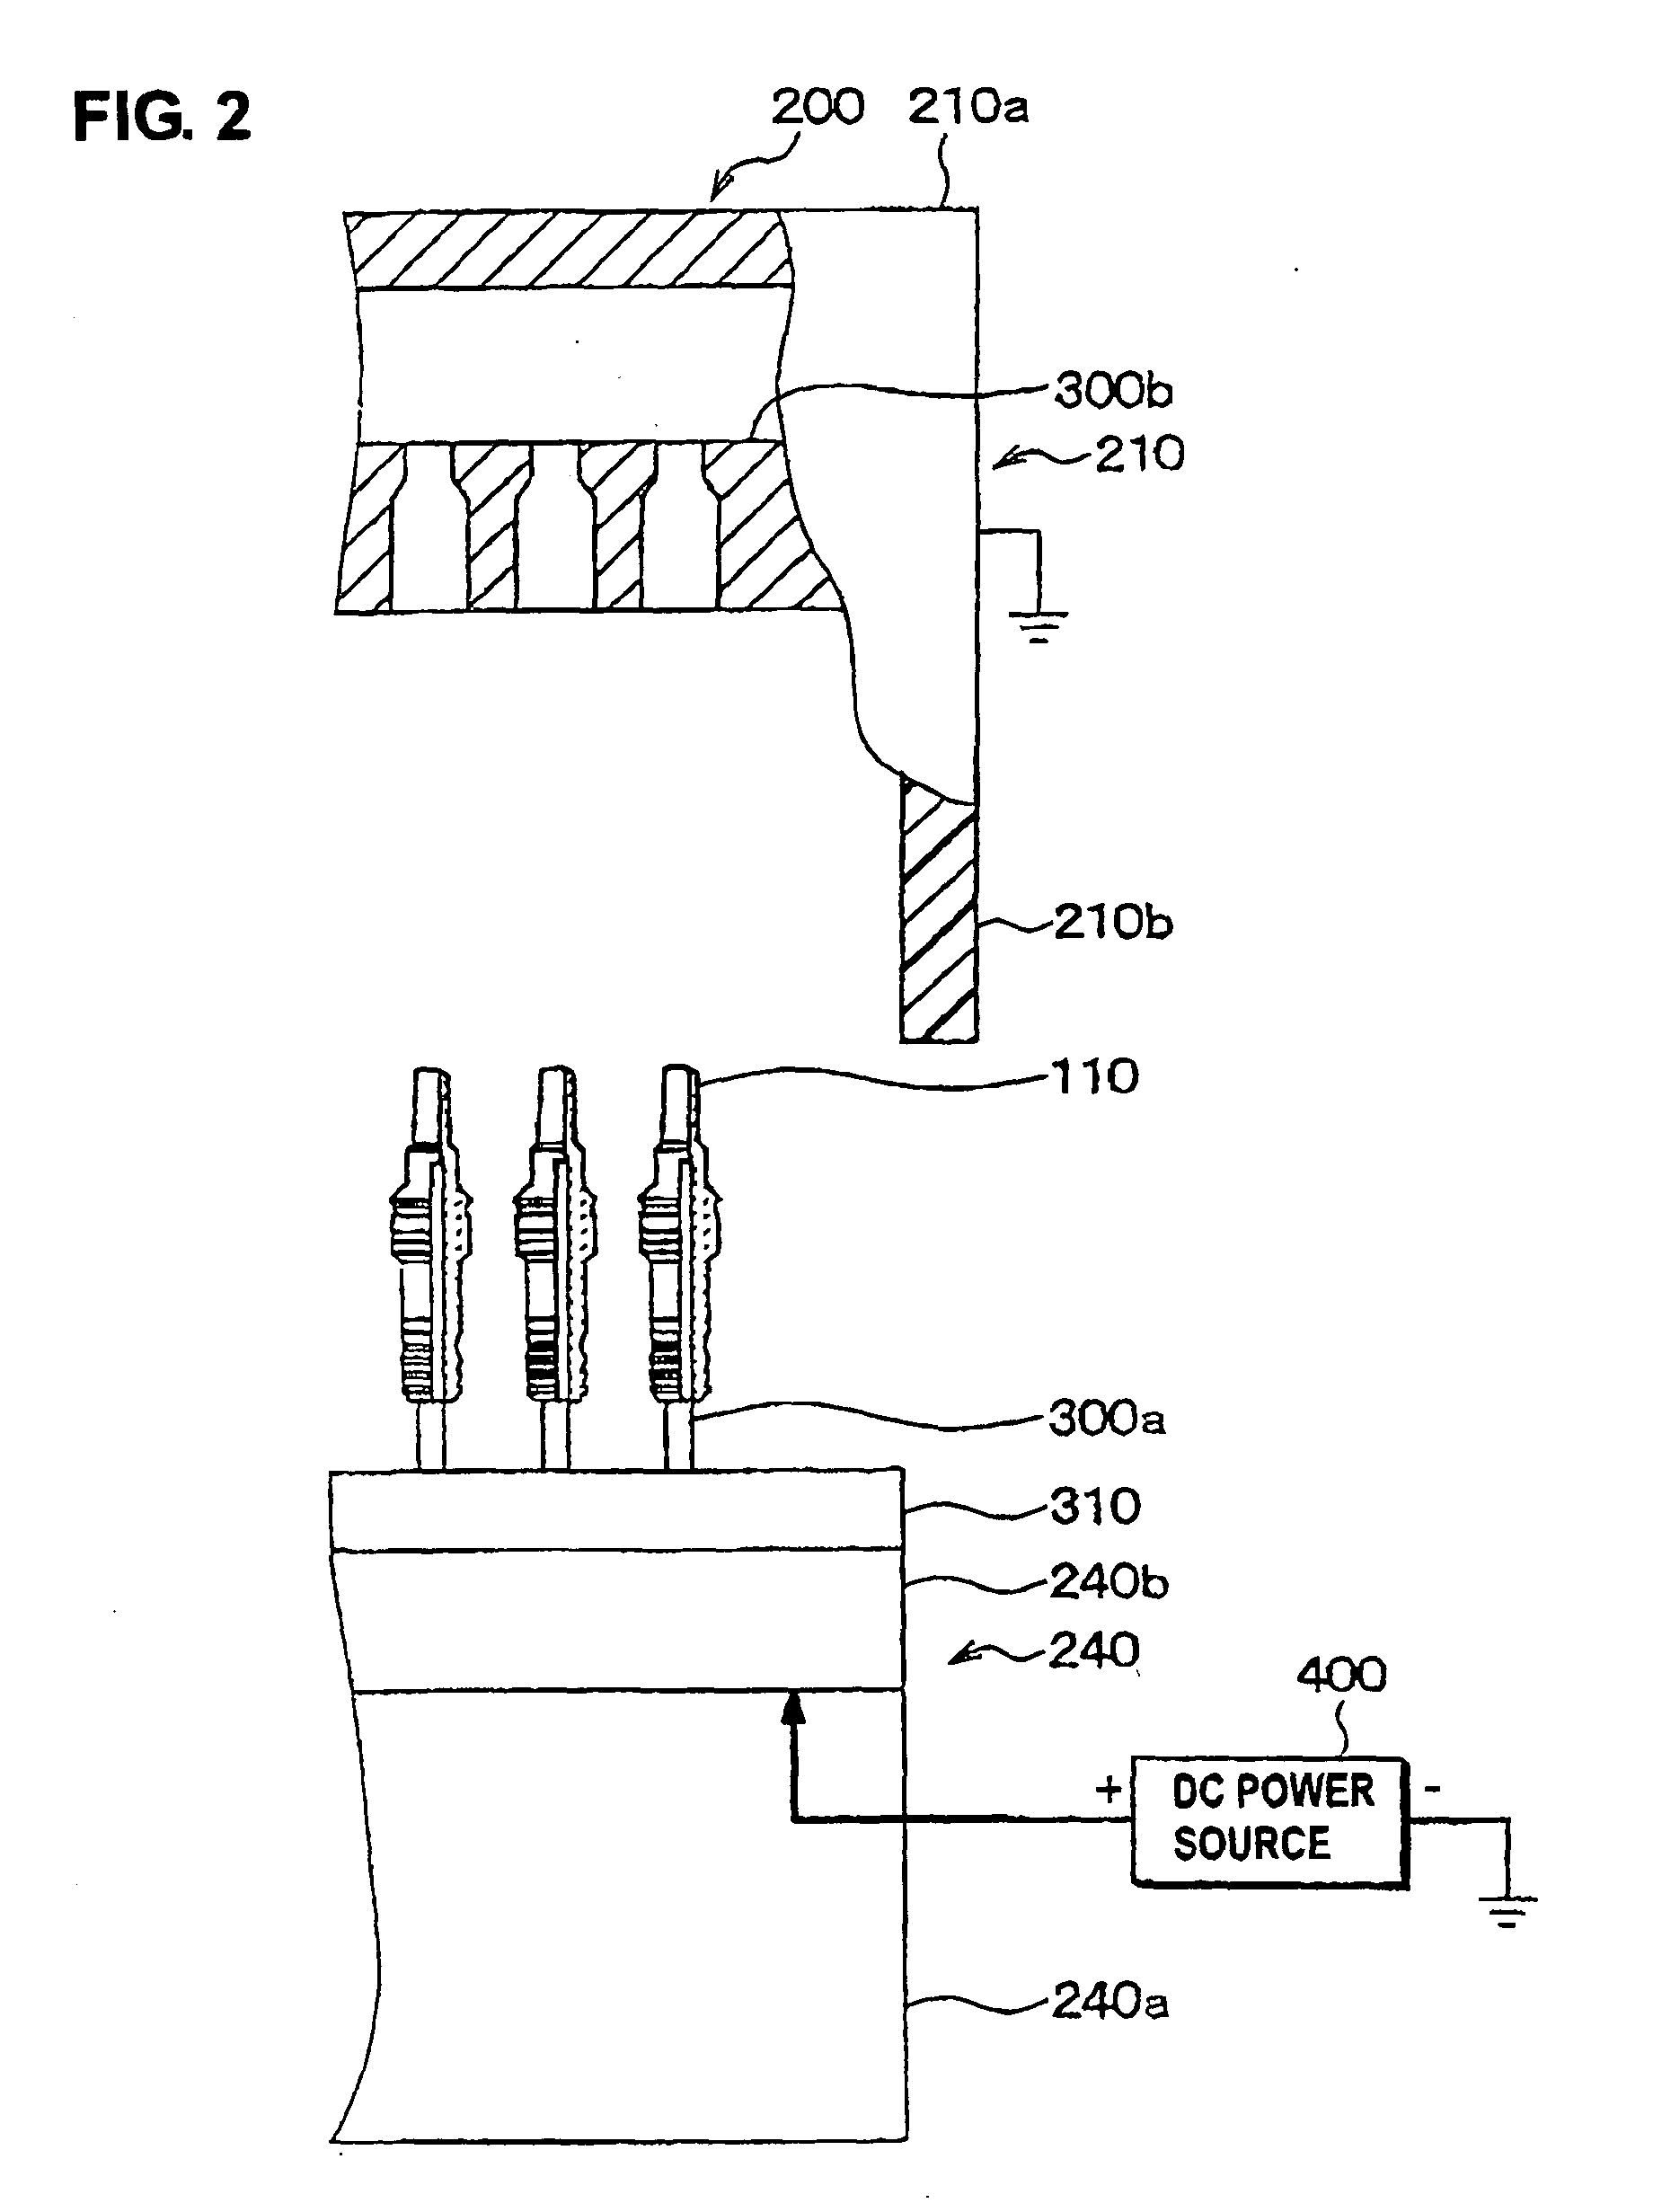 Method of inspecting insulators to detect defects